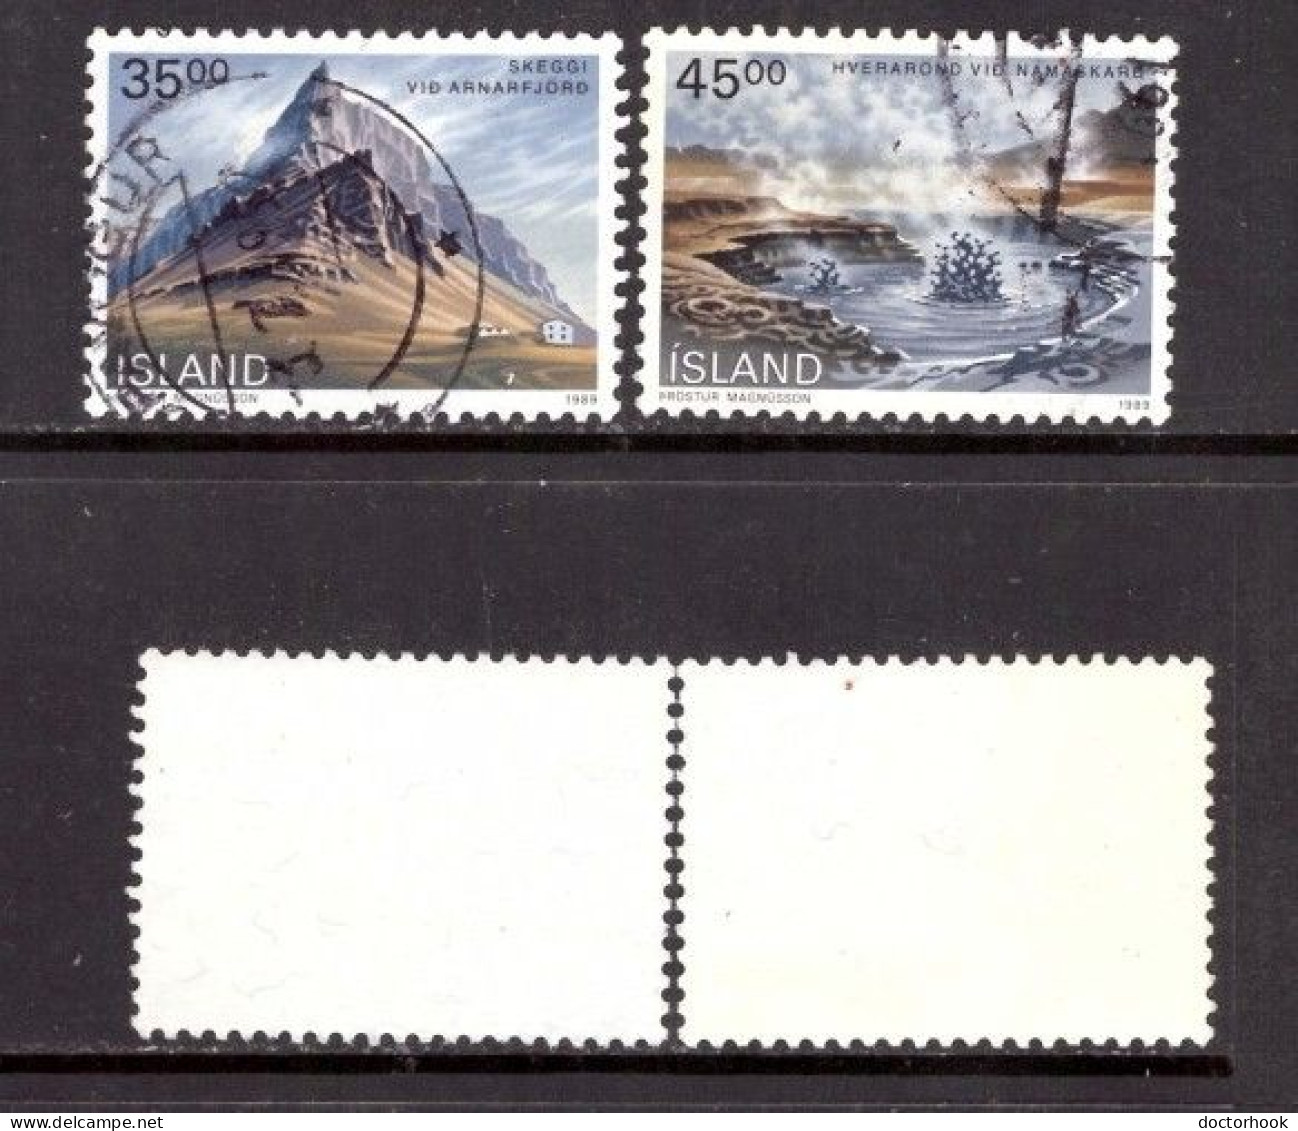 ICELAND   Scott # 678-9 USED (CONDITION AS PER SCAN) (Stamp Scan # 966-5) - Oblitérés